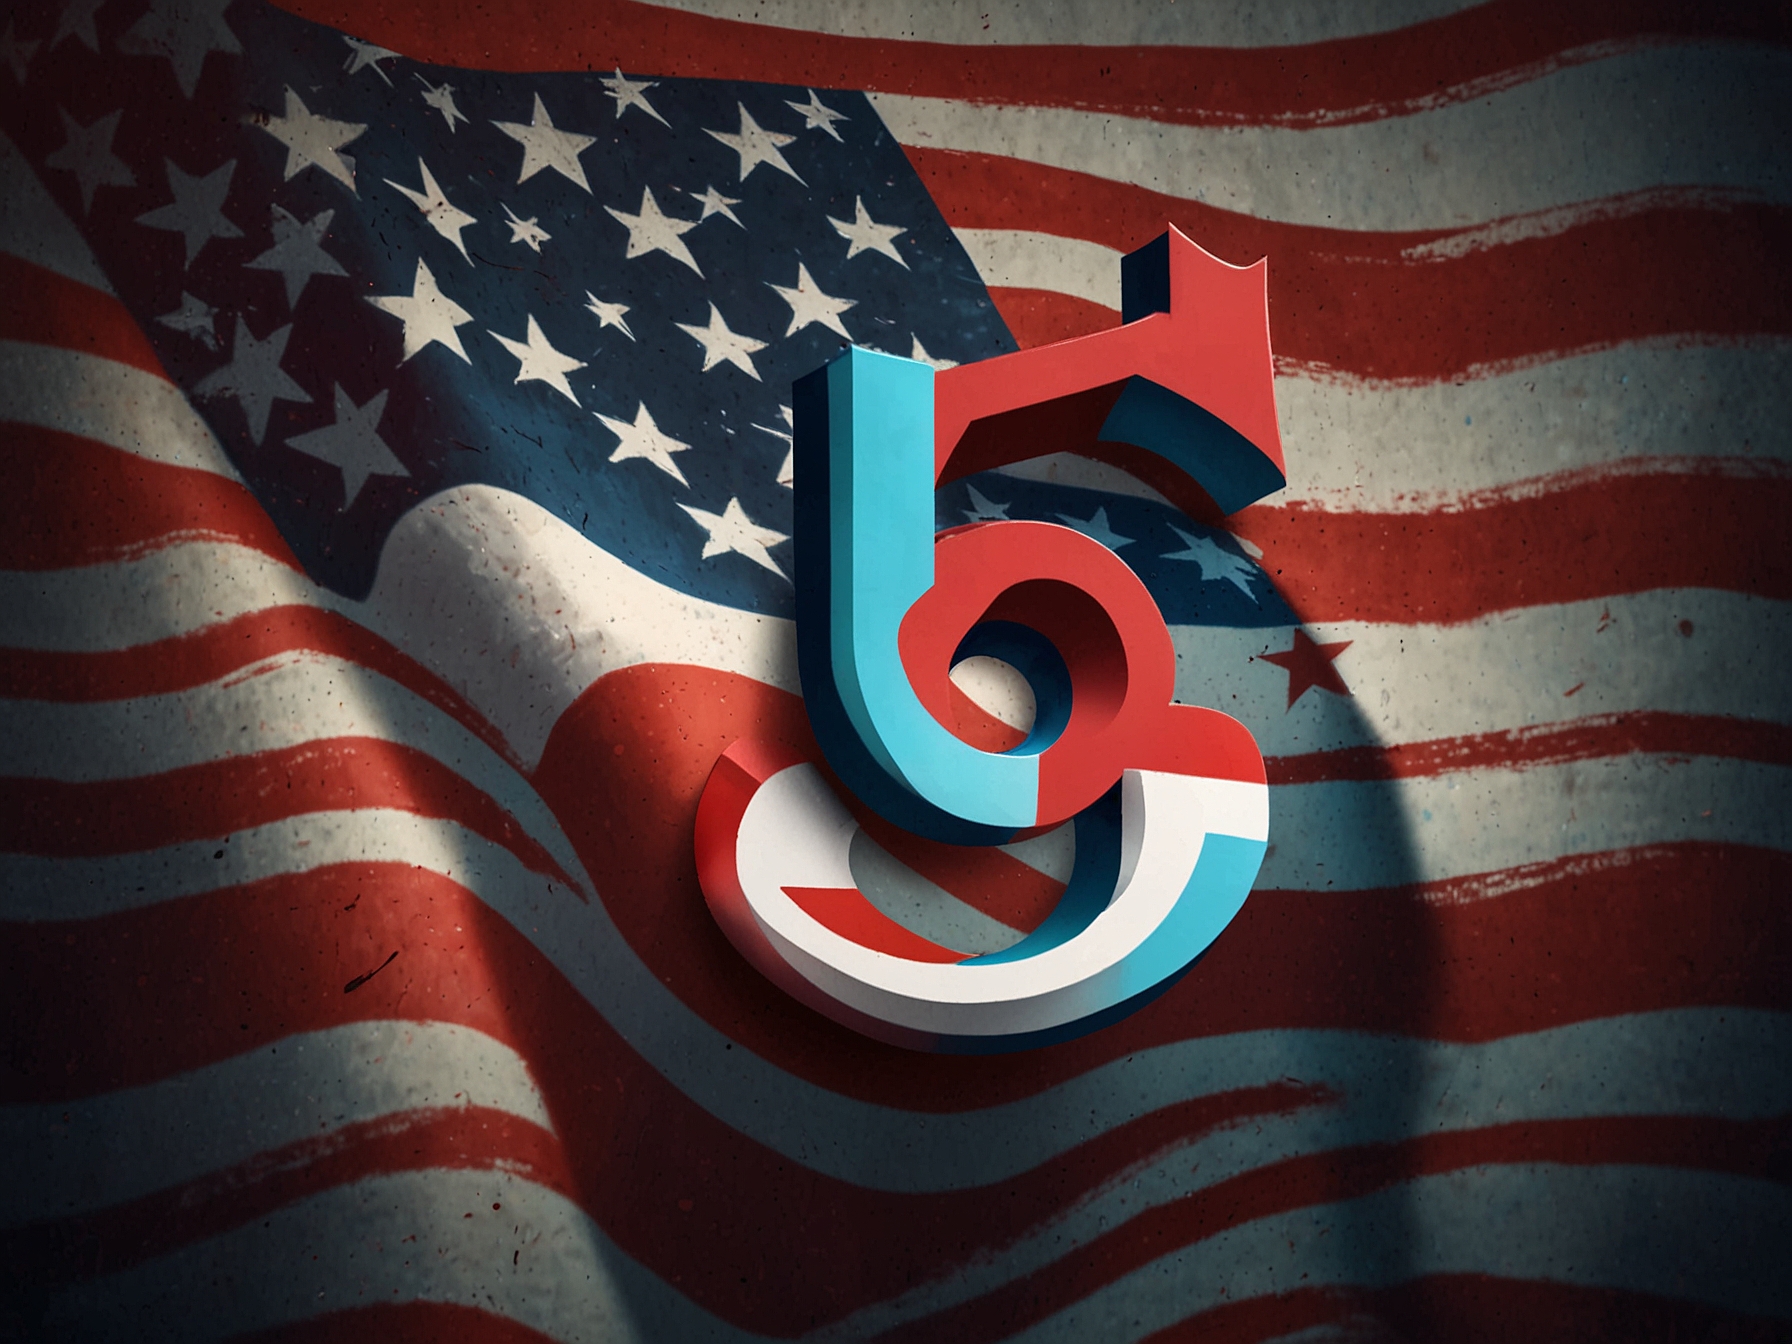 Depiction of the TikTok logo with an American flag backdrop, emphasizing the app's massive U.S. user base and the potential impact of an imminent nationwide ban.